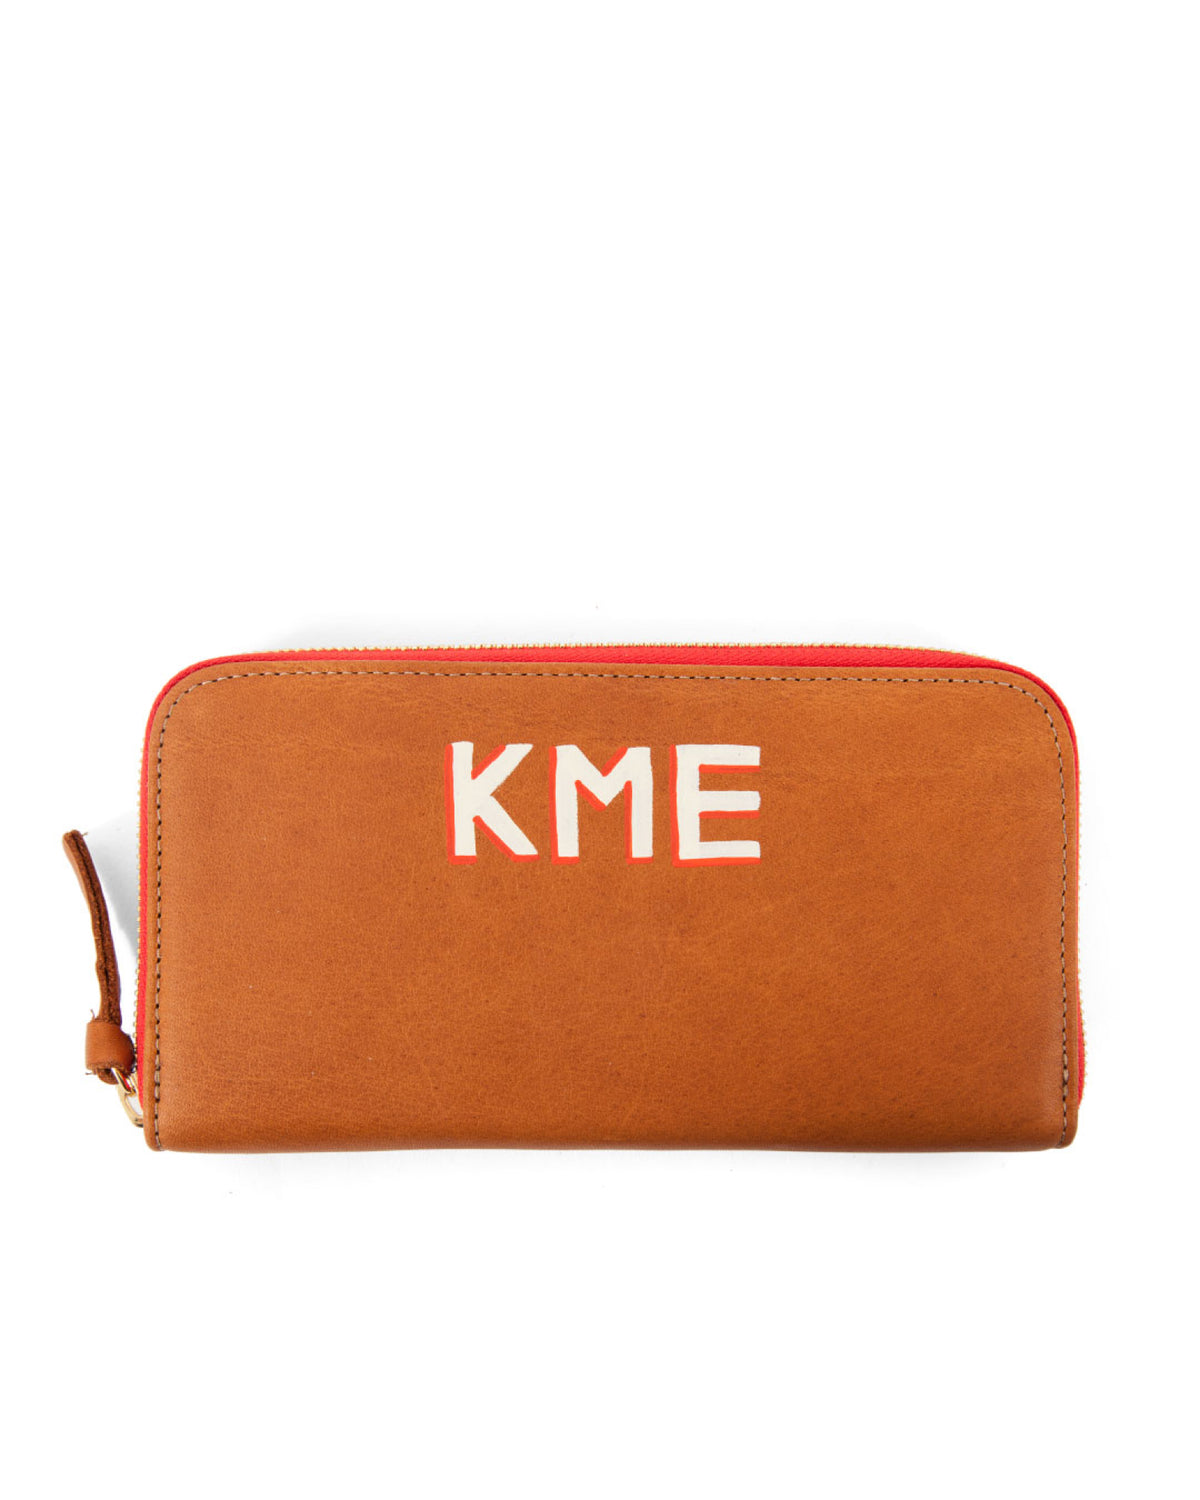 Tan Zip Wallet with 1 Inch Hand Painted Letters, Top Center Placement.